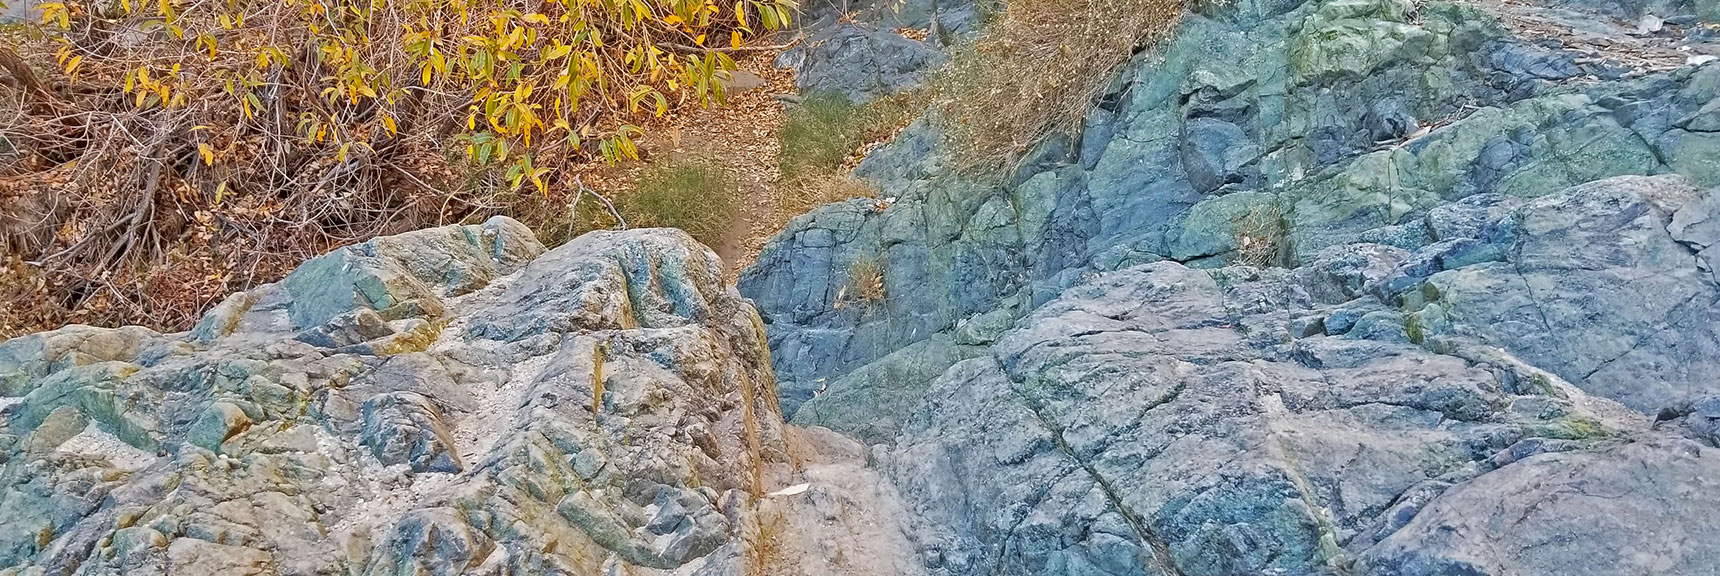 There are a Number of Rock Scrambles Along the Way Near the Falls. | Darwin Falls, Death Valley National Park, California